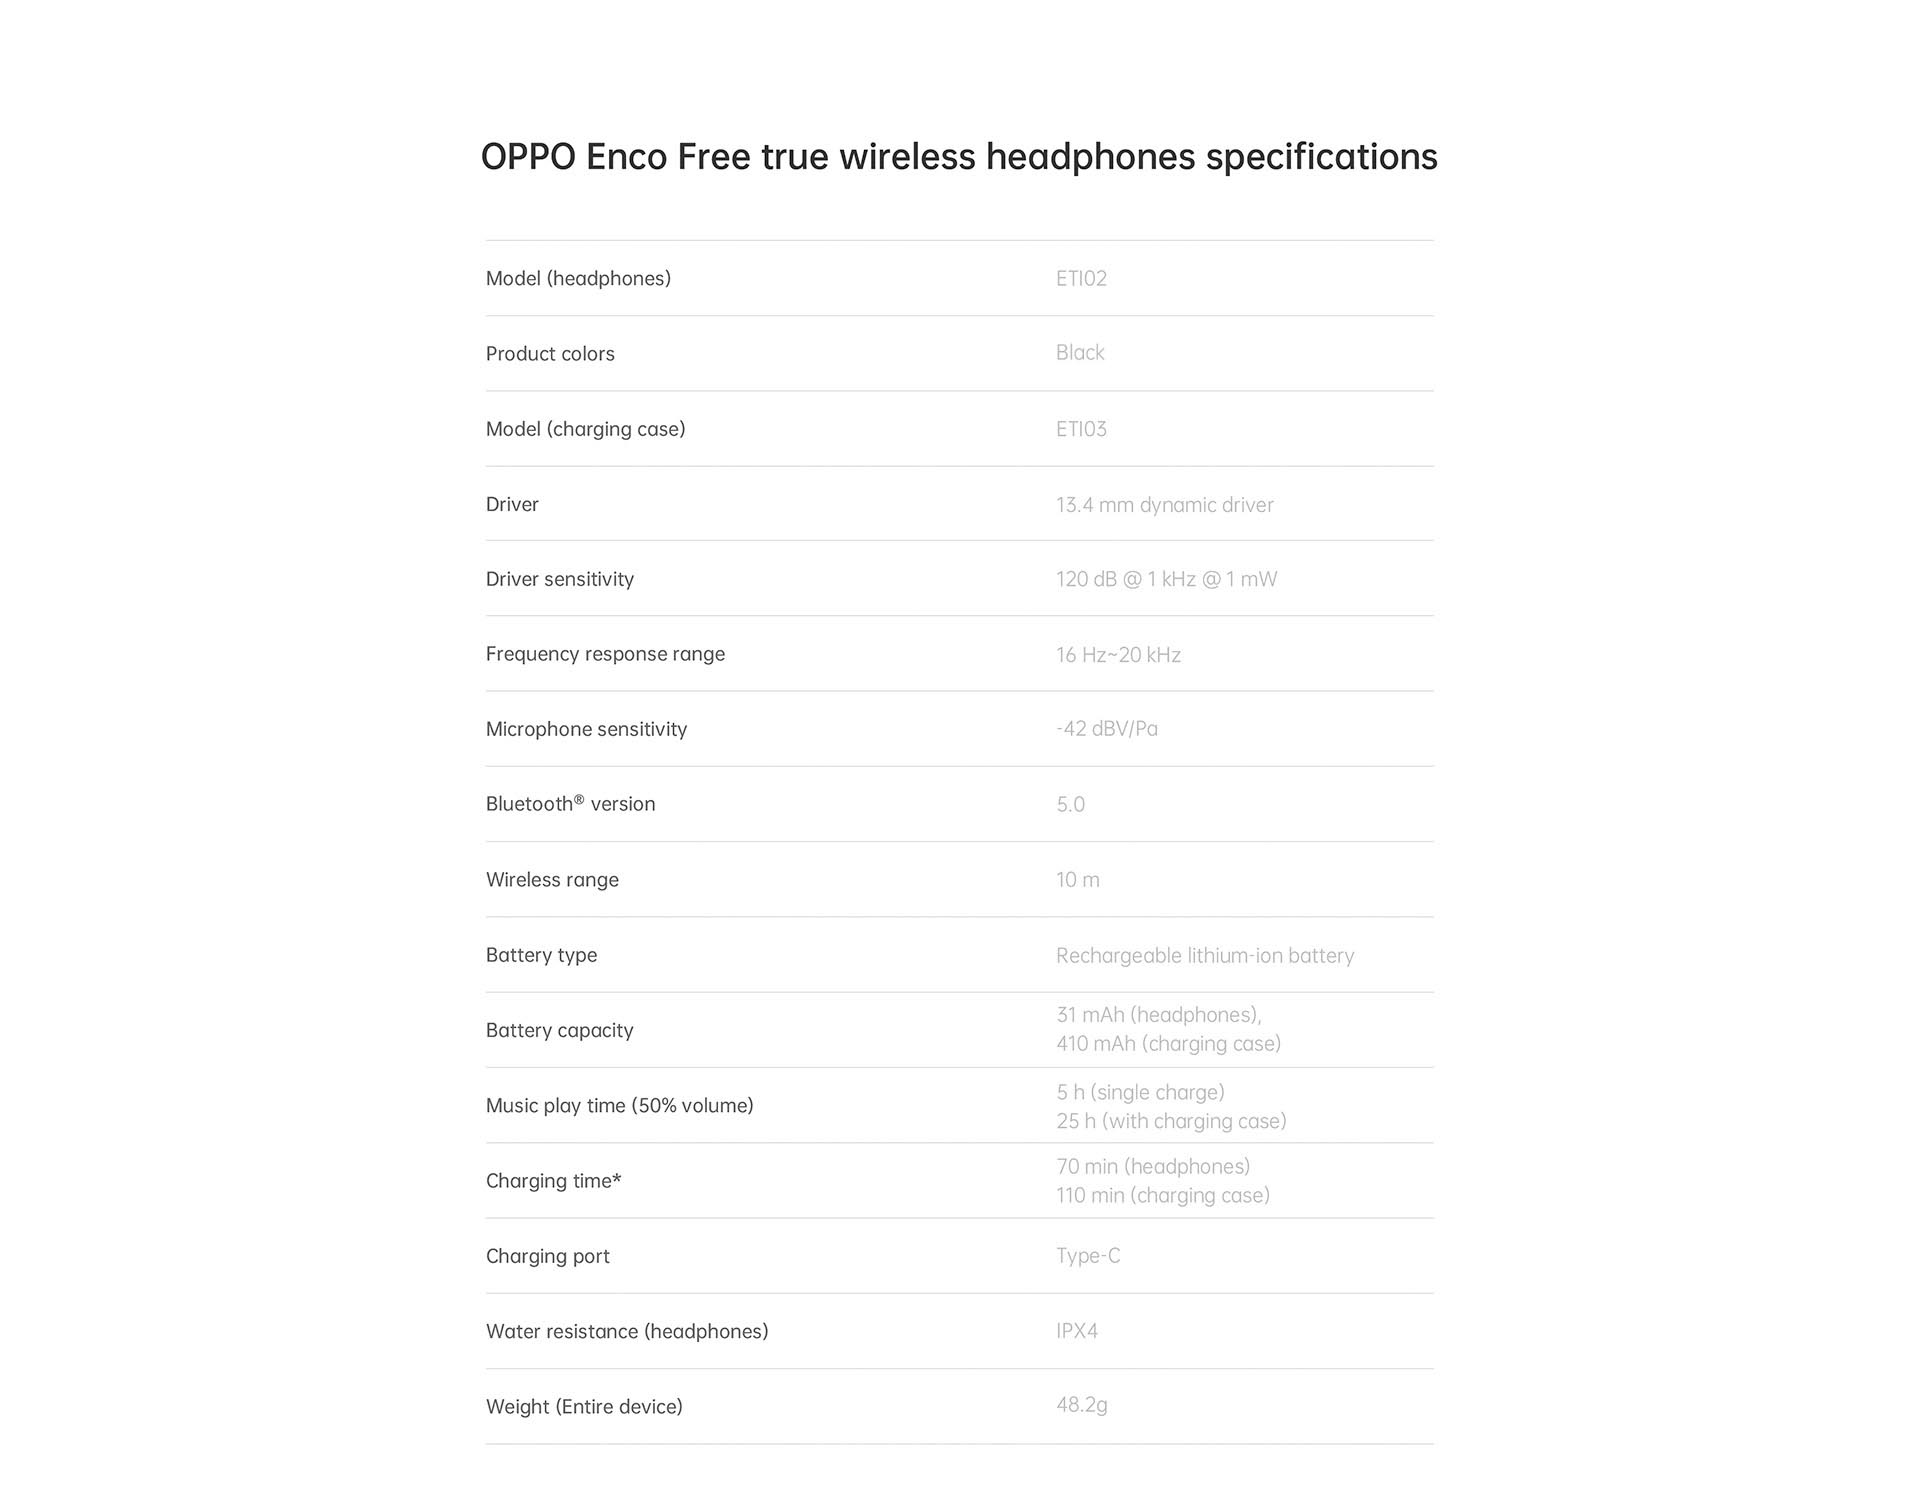 OPPO Enco Free Specifications